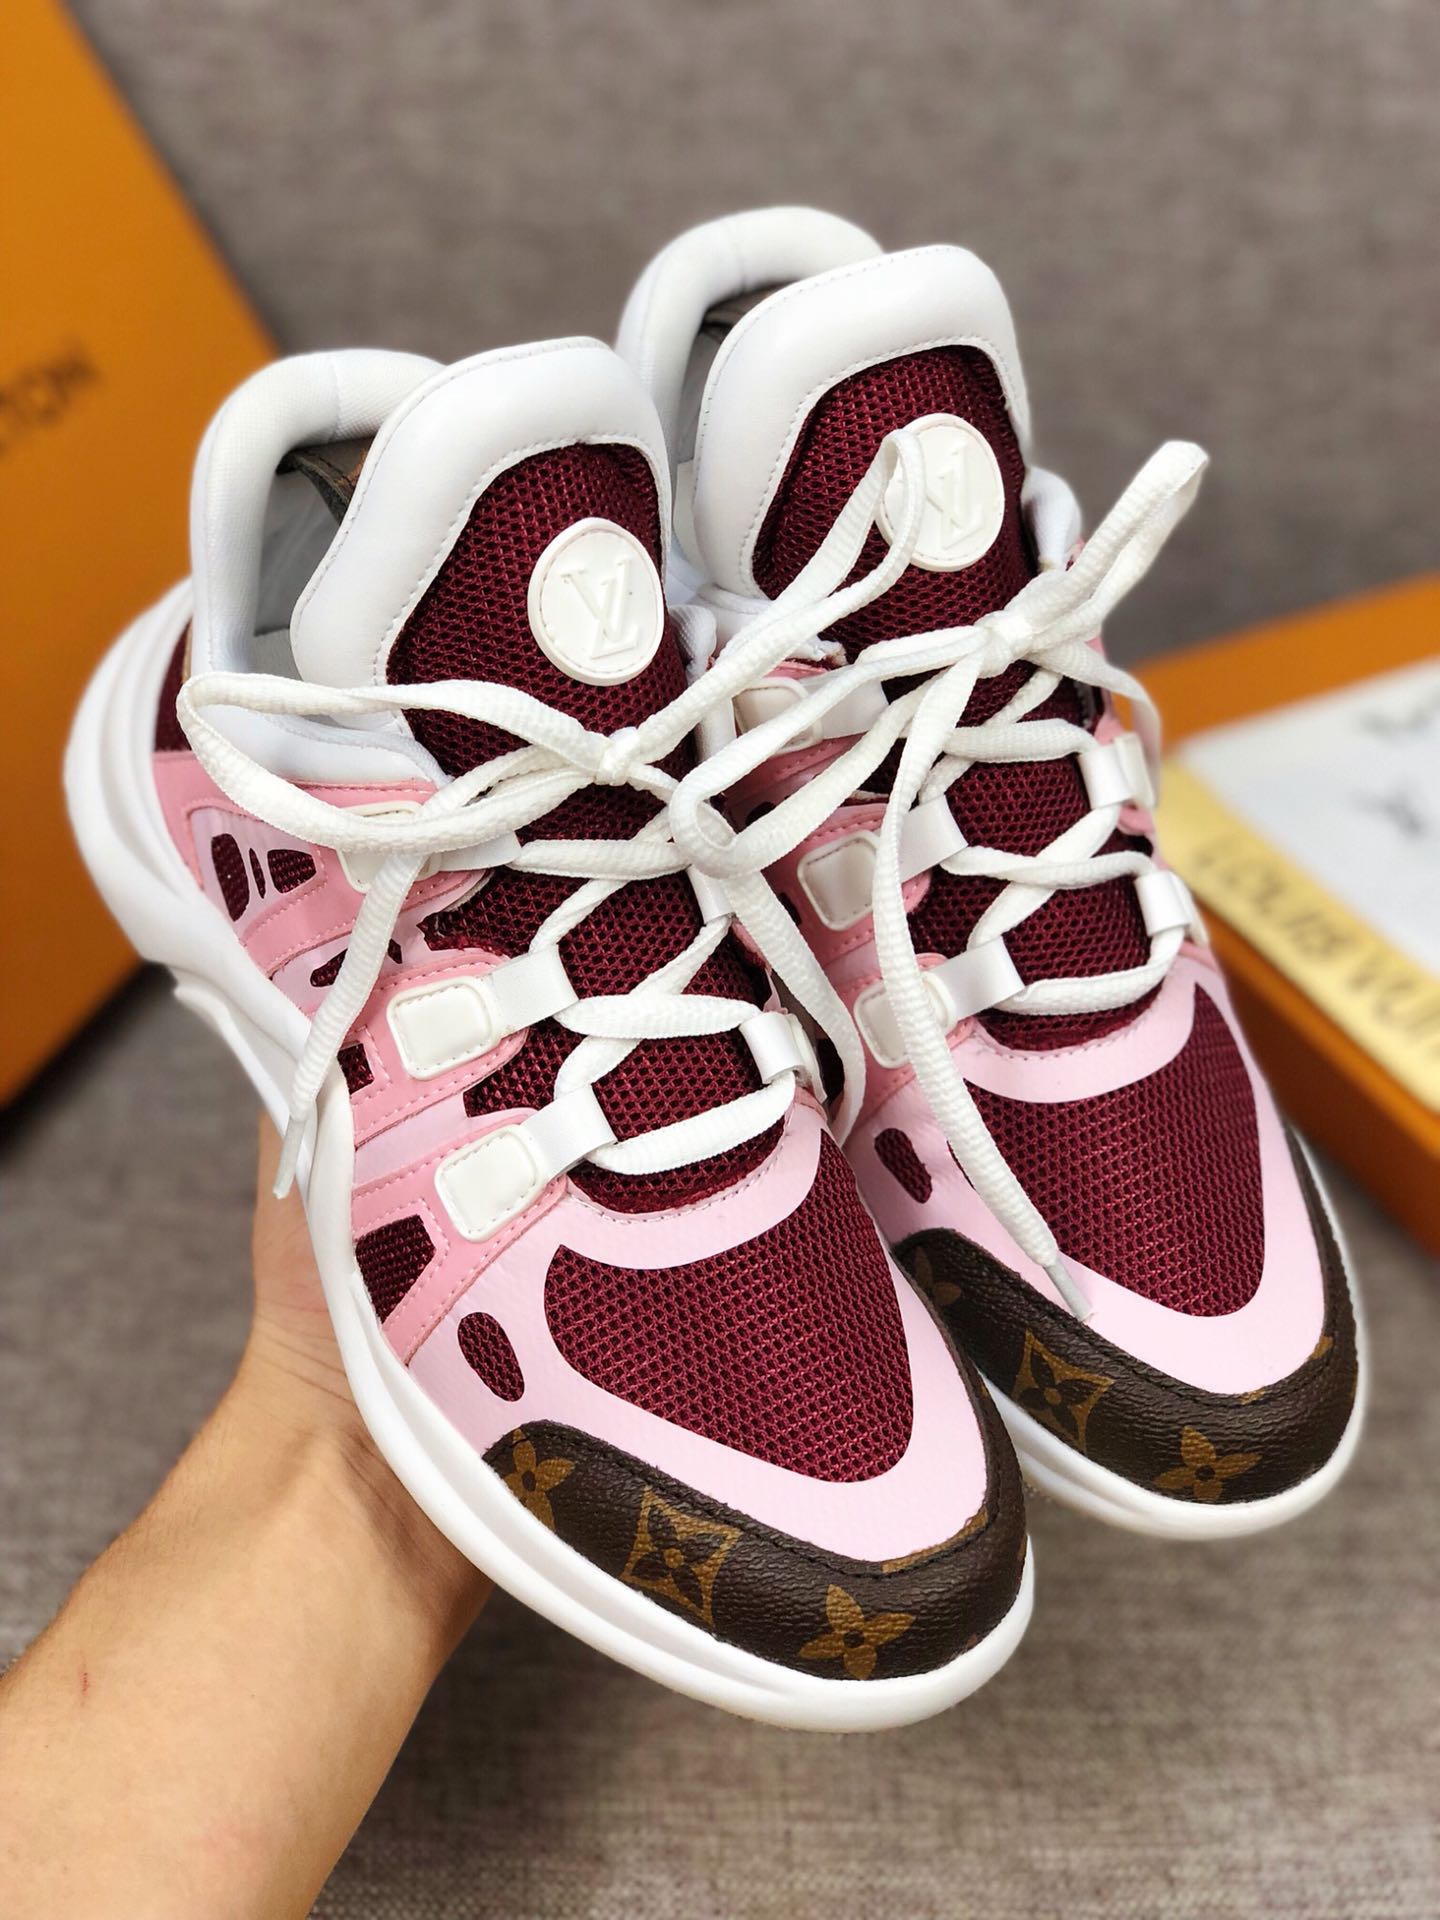 VO - LUV Archlight Pink Brown Sneaker